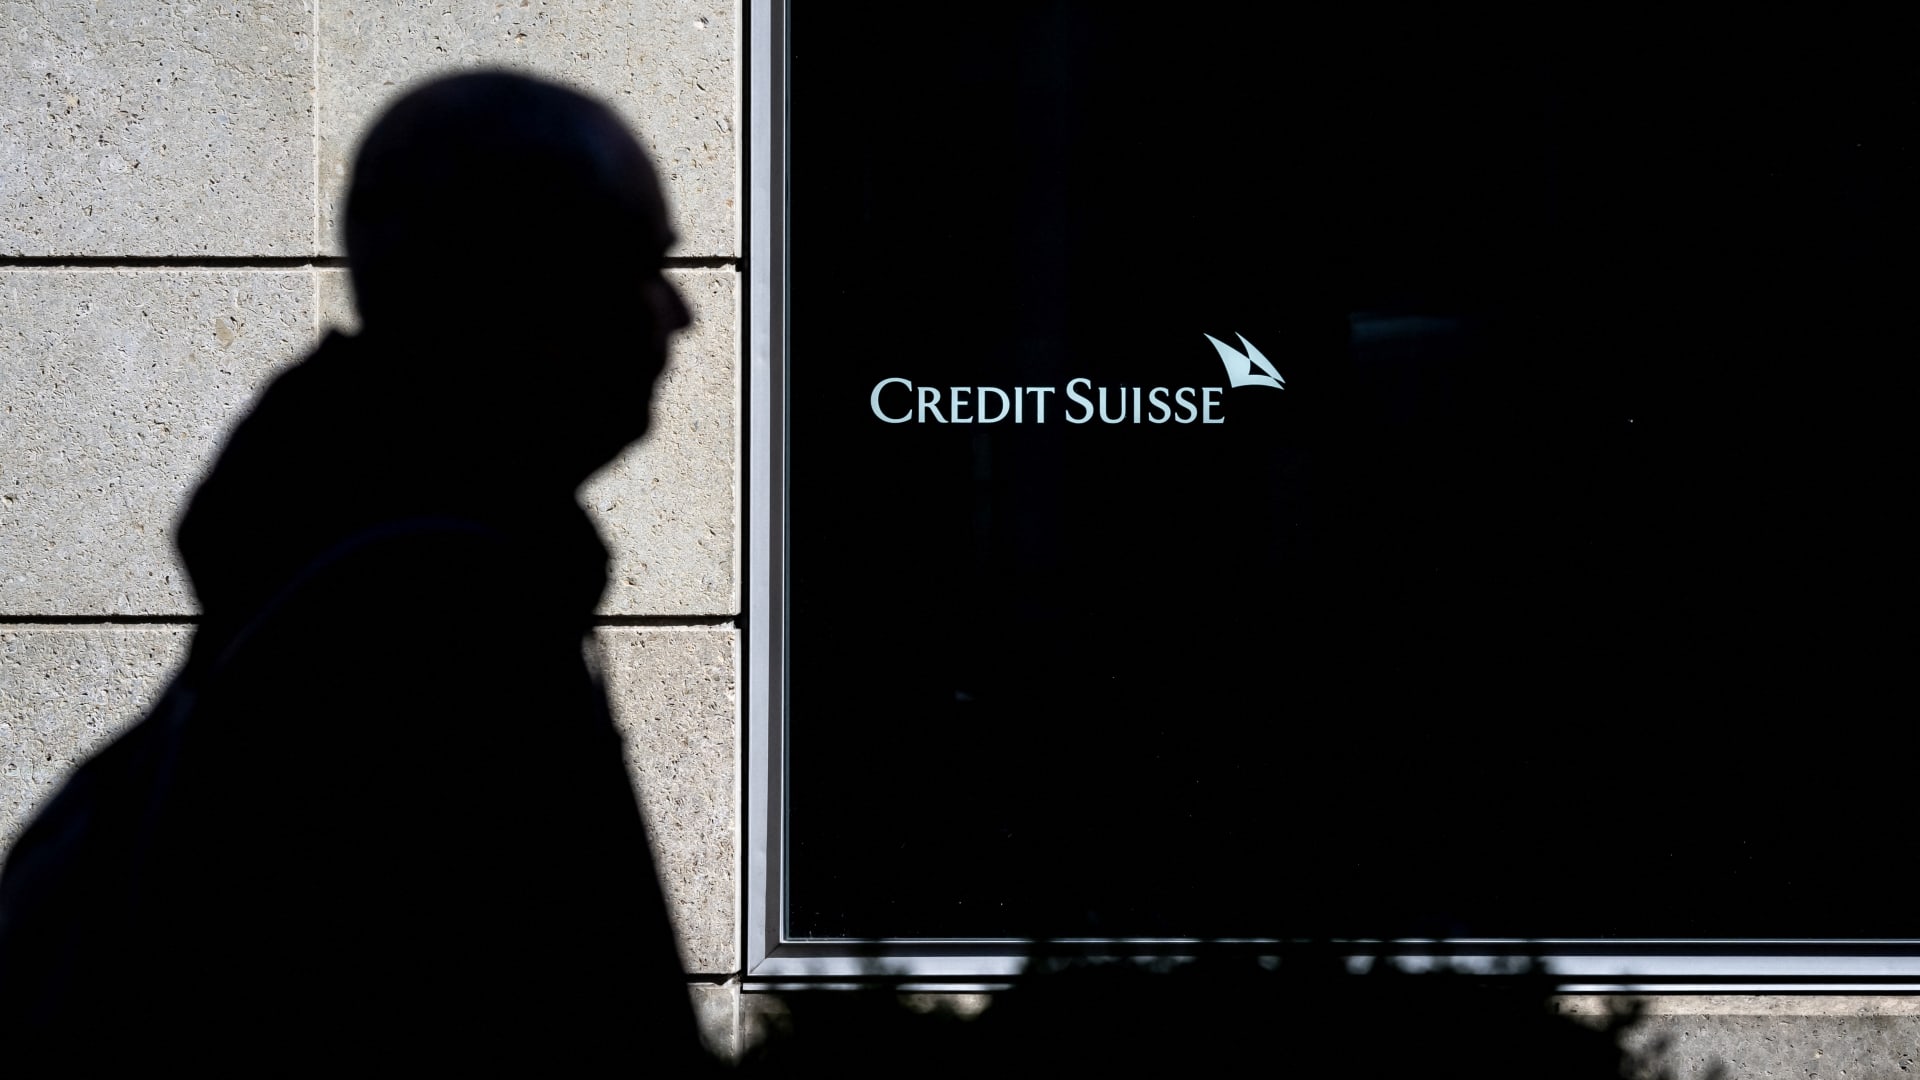 Financial shares fall as Credit Suisse becomes latest crisis for the sector